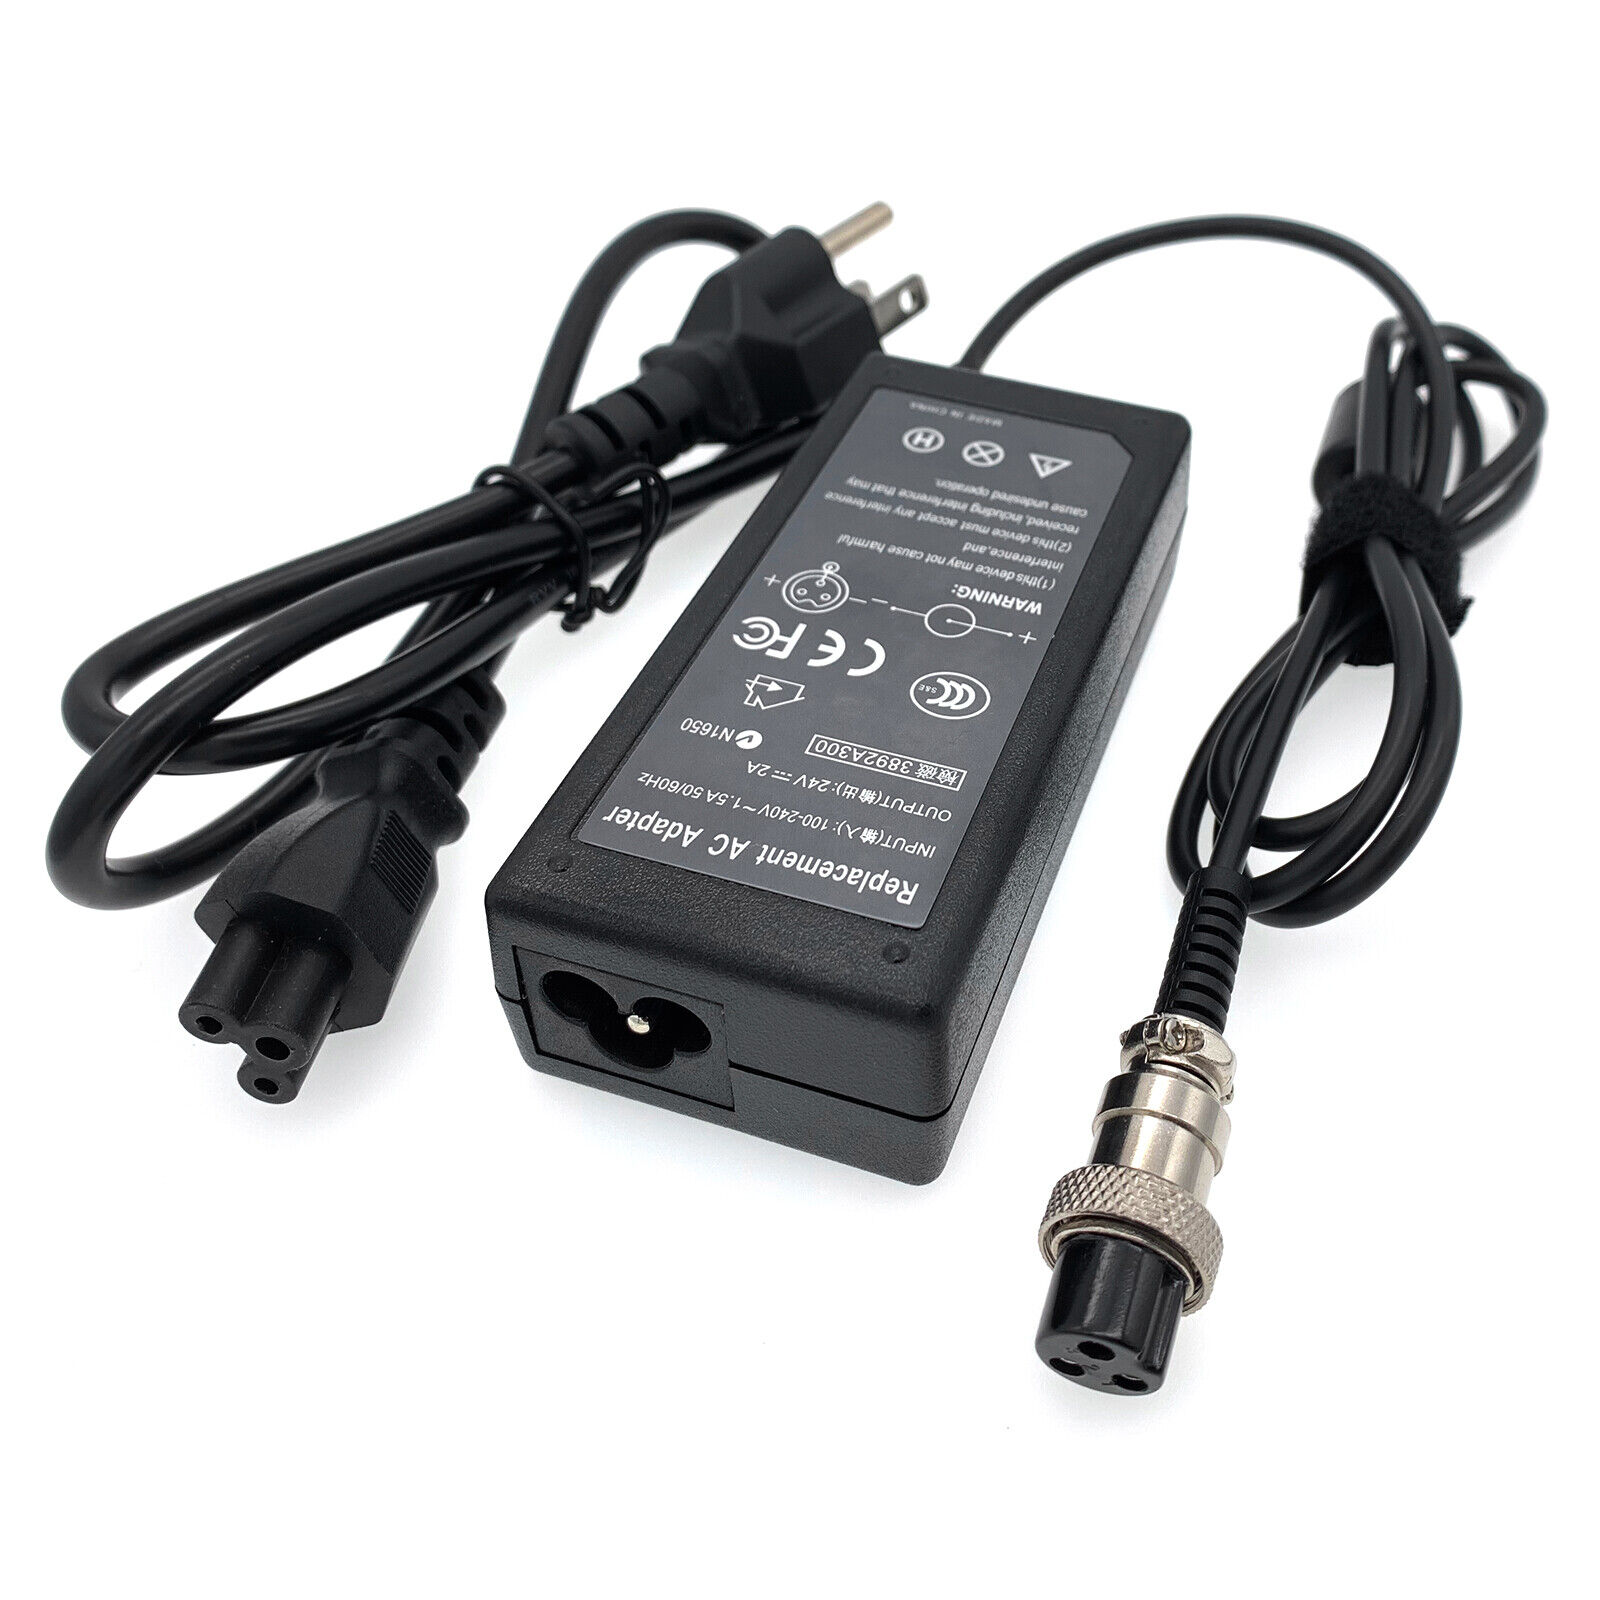 48W Electric Scooter Charger for Freedom 943 24V 2A 3-Pin Boreem Jia 601-S Vapor X-12 X-Treme X-250 24V 2A Electric Sco